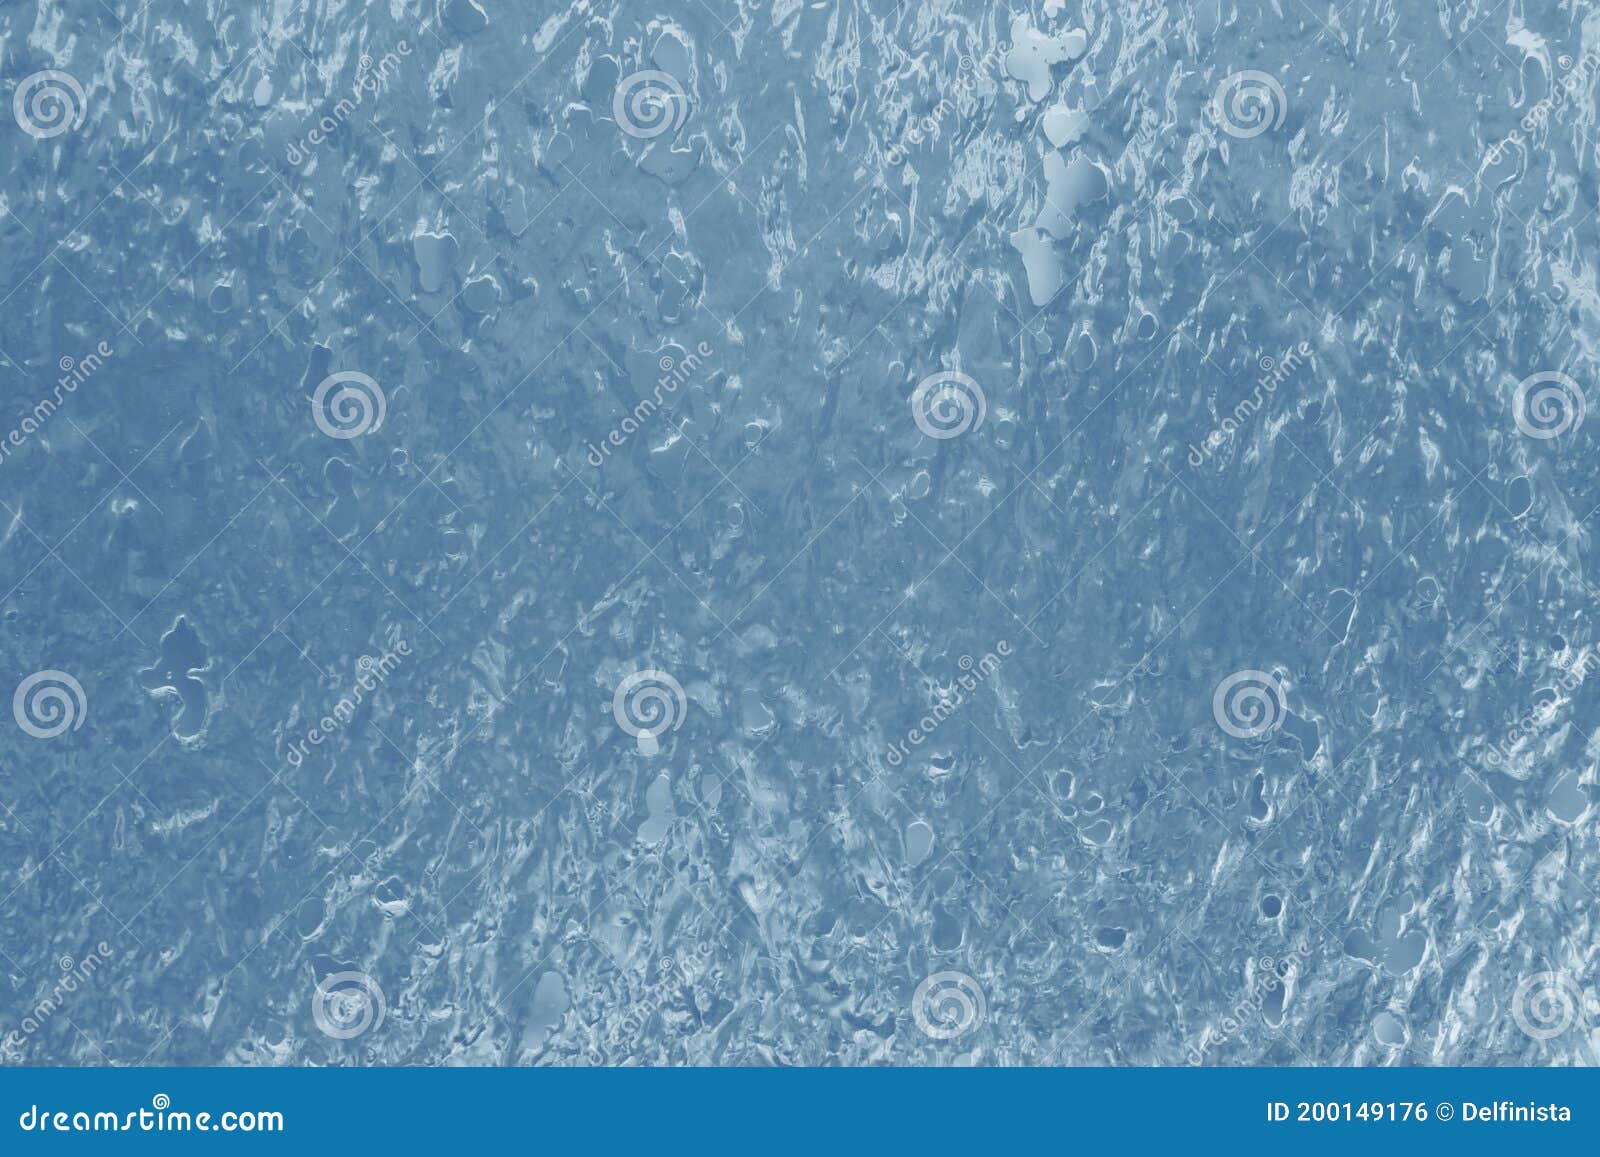 blue glass ice background - frosted window